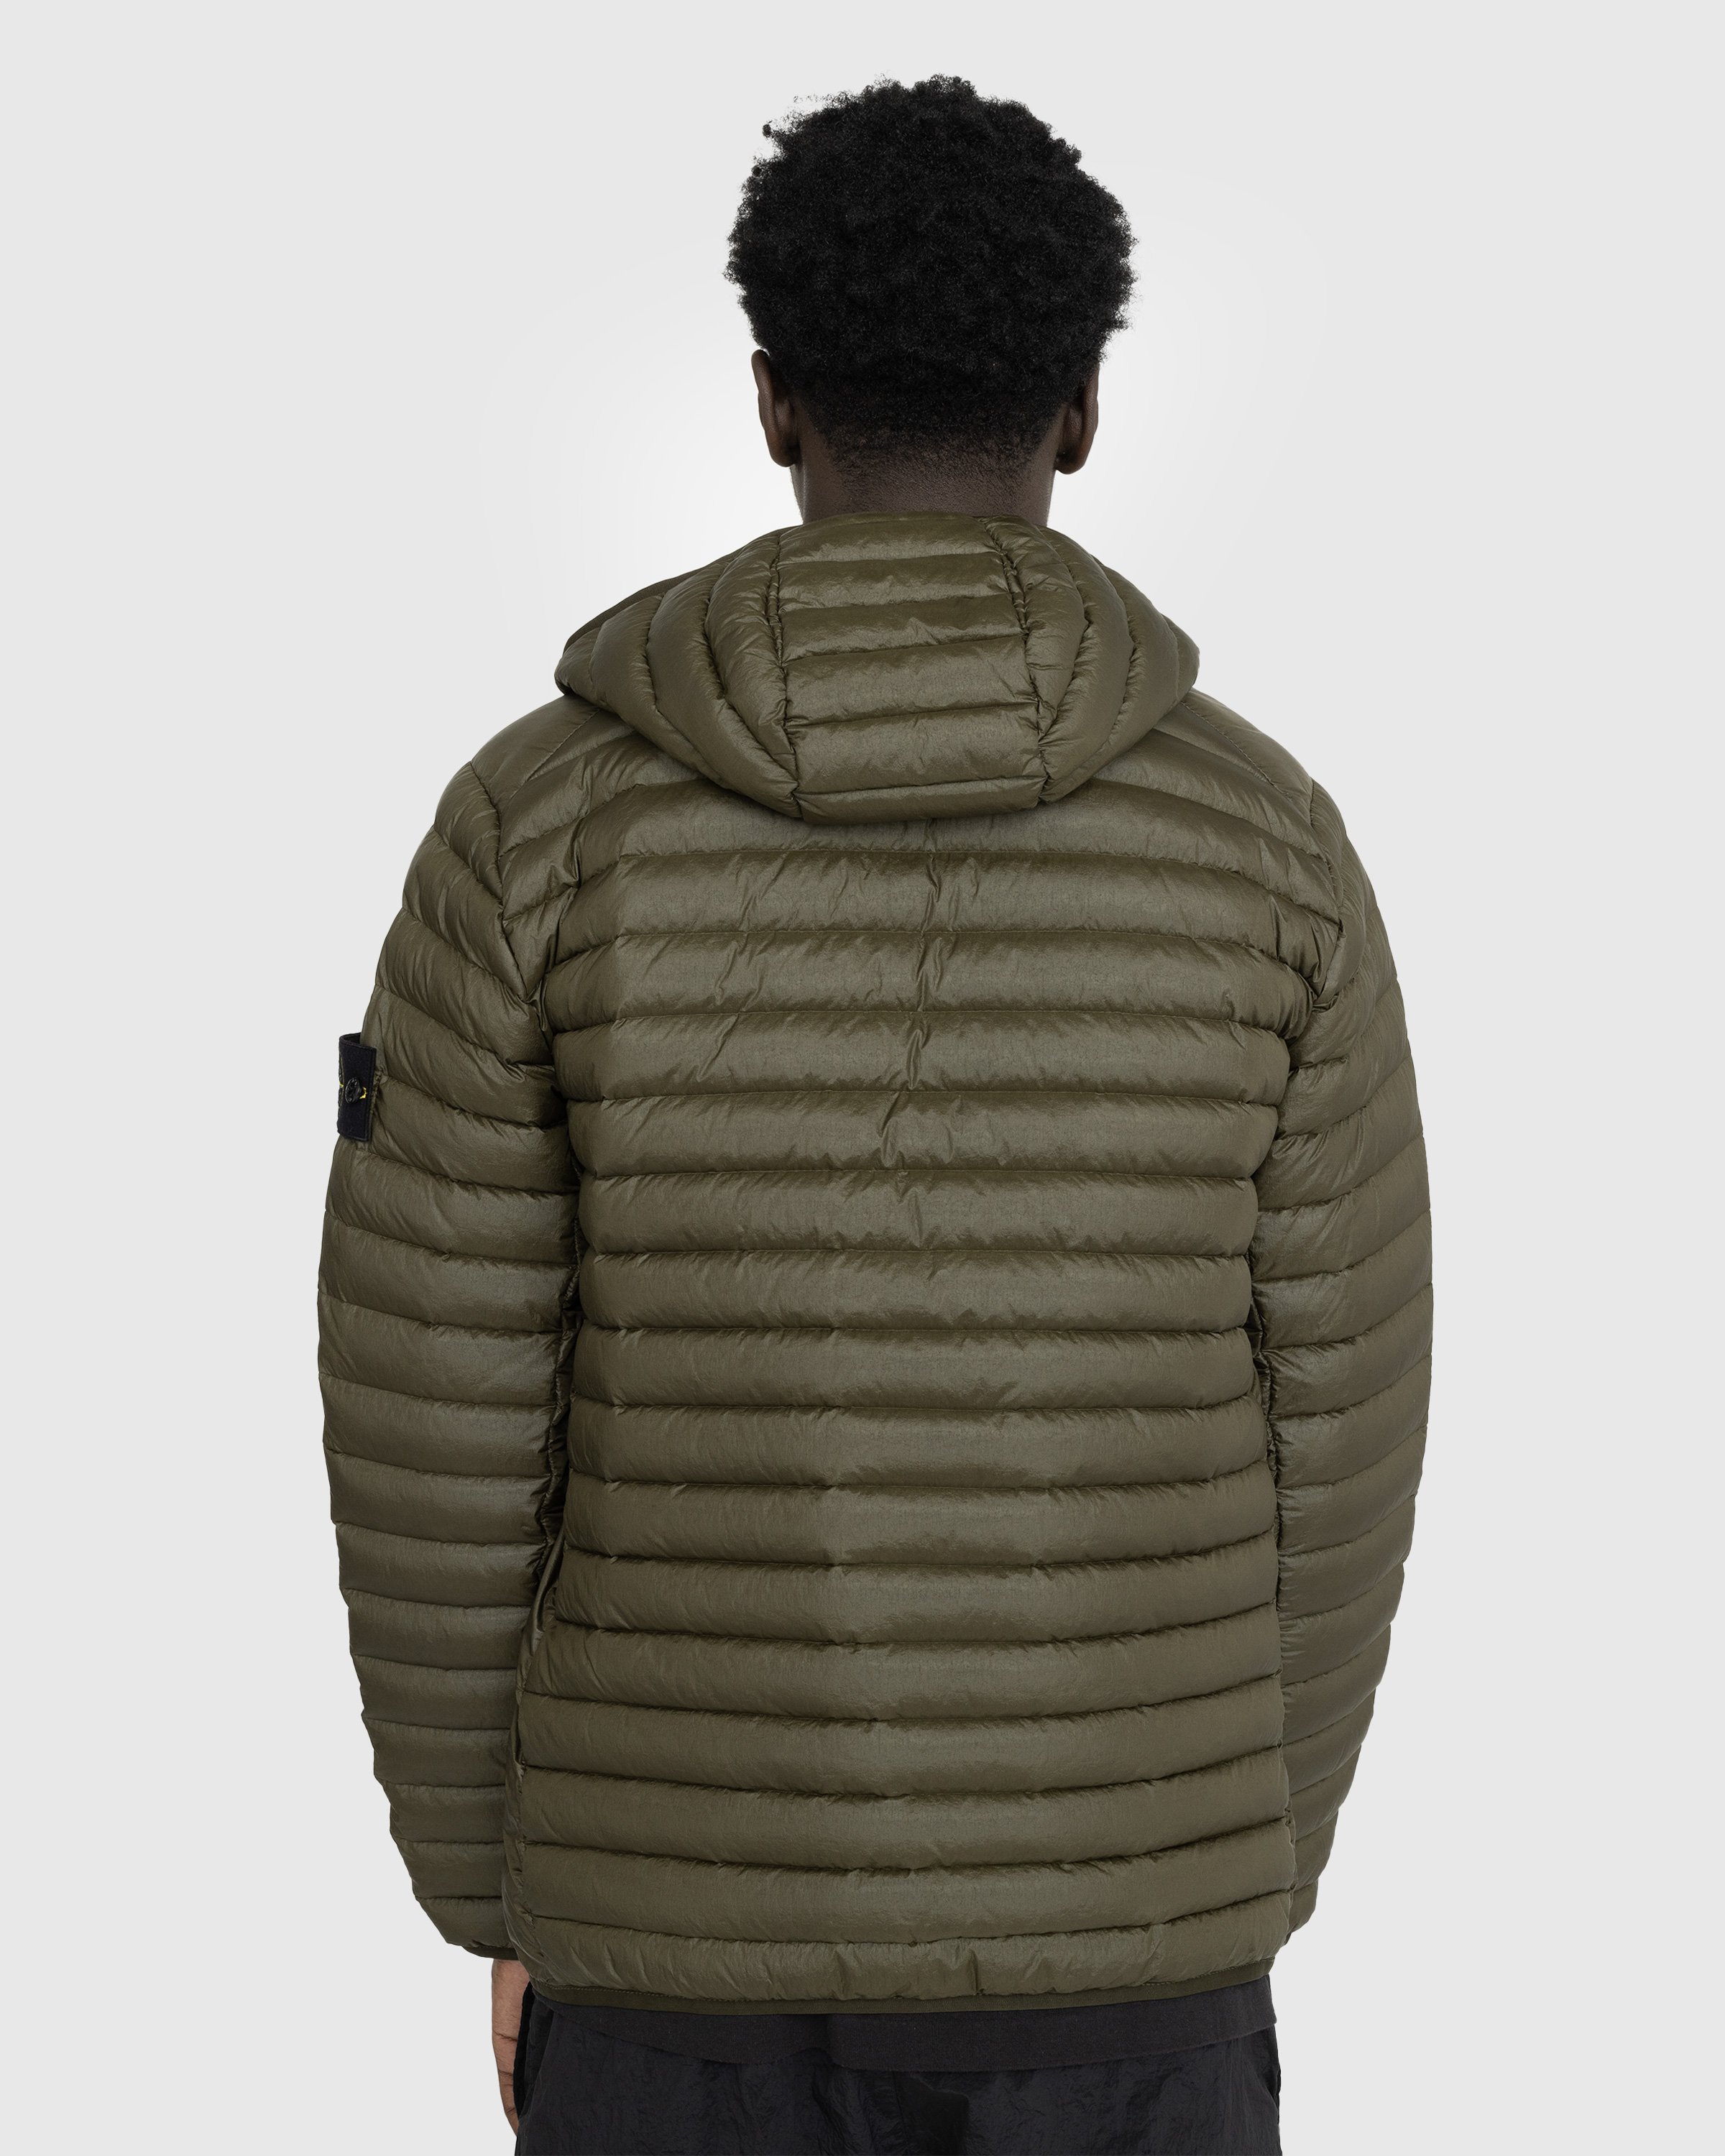 Stone Island - Packable Recycled Nylon Down Jacket Olive - Clothing - Green - Image 3